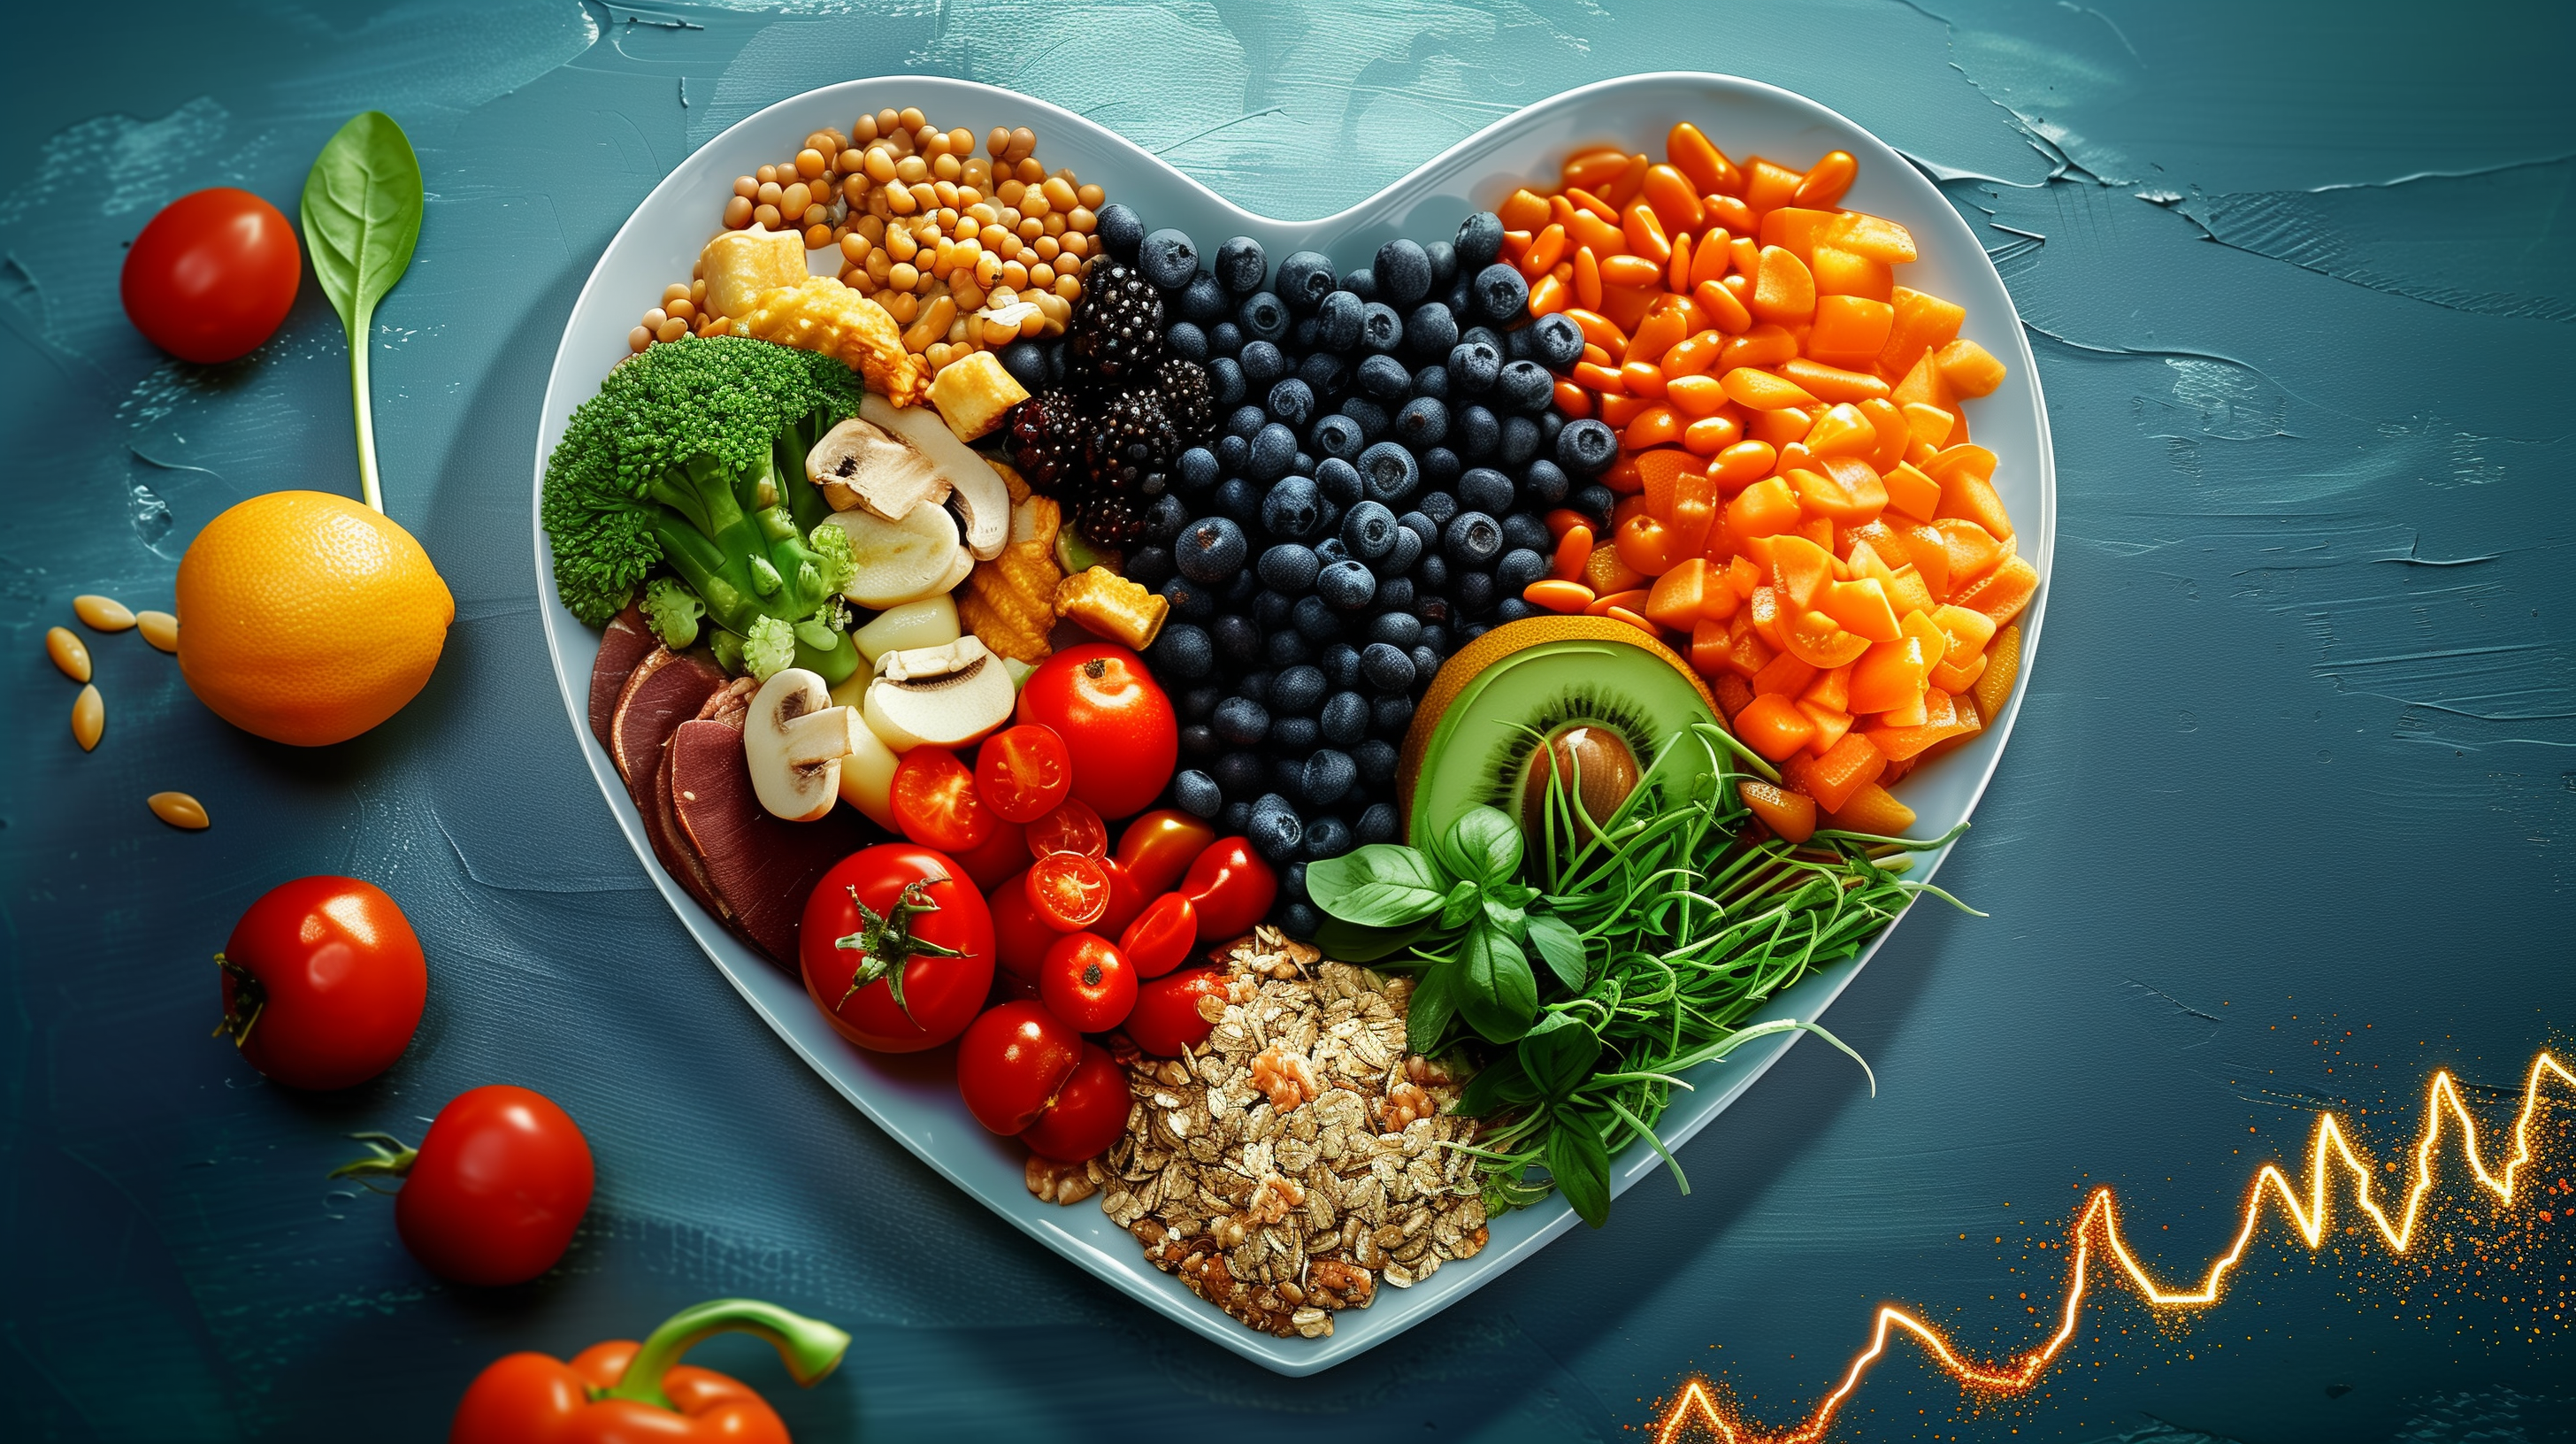 a heart-shaped plate divided equally among fruits, vegetables, whole grains, and lean proteins